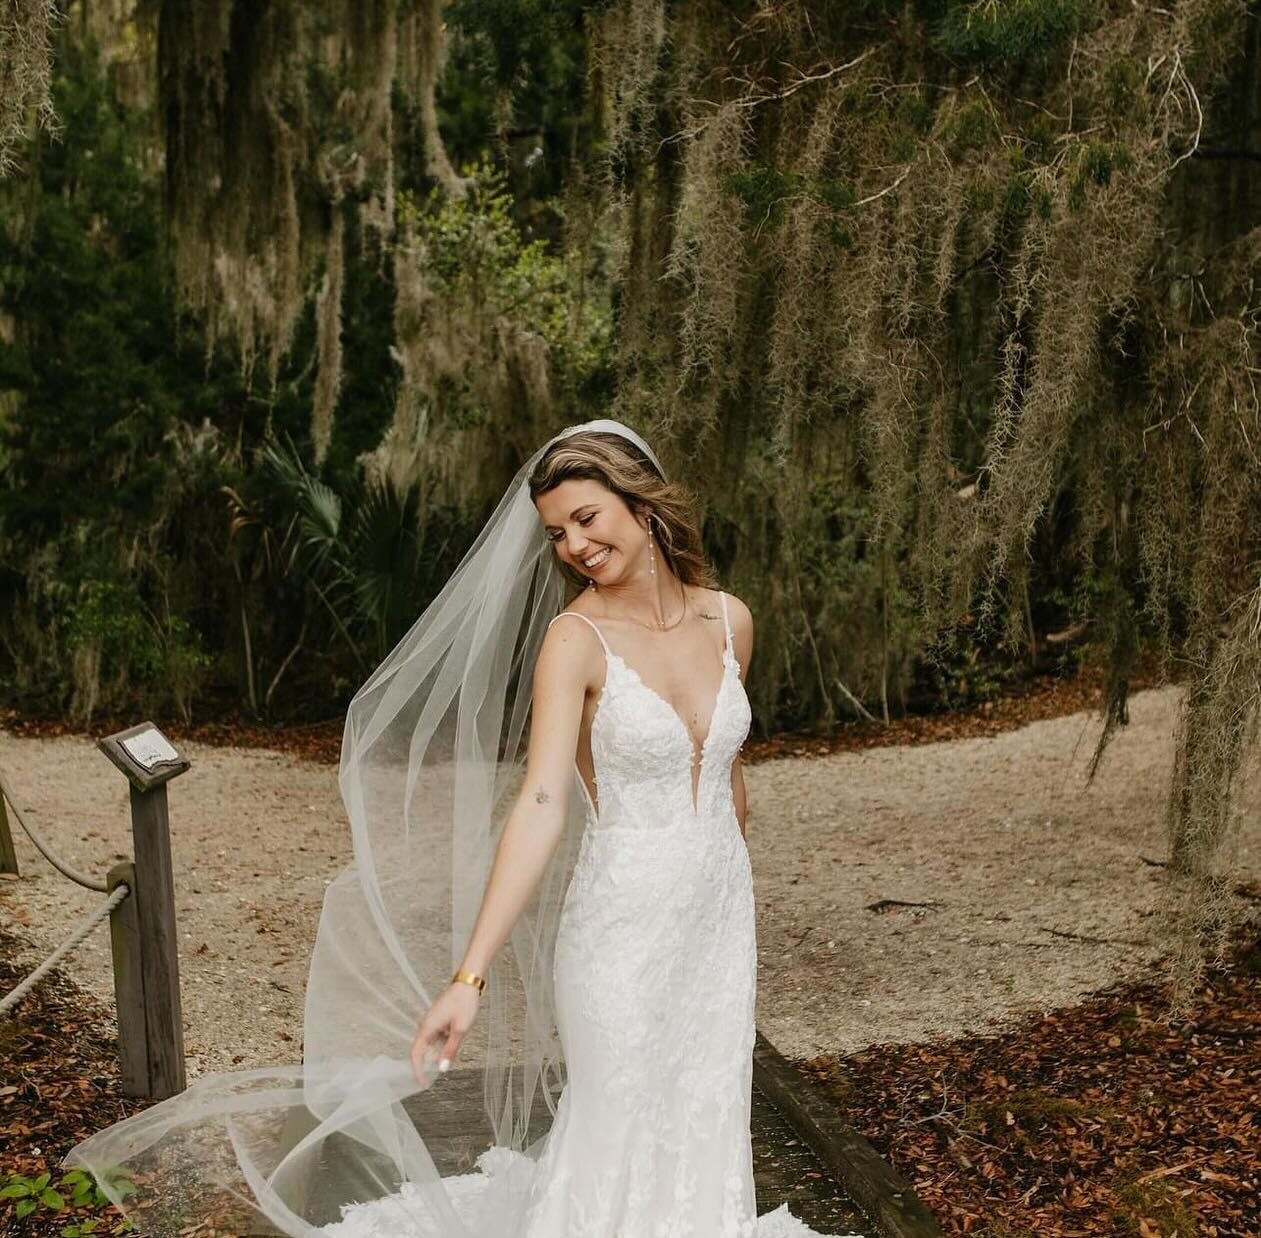 So happy to see the rain stopped for Kelli and her groom!
Photographer @kohenandco 
Hair stylist @beautybyallysonmae 
Florals @indyflorals 
Venue @omniameliaisland 
#staugustinemakeupartist #staugustinemua #staugustinemakeup #staugustinewedding #omni